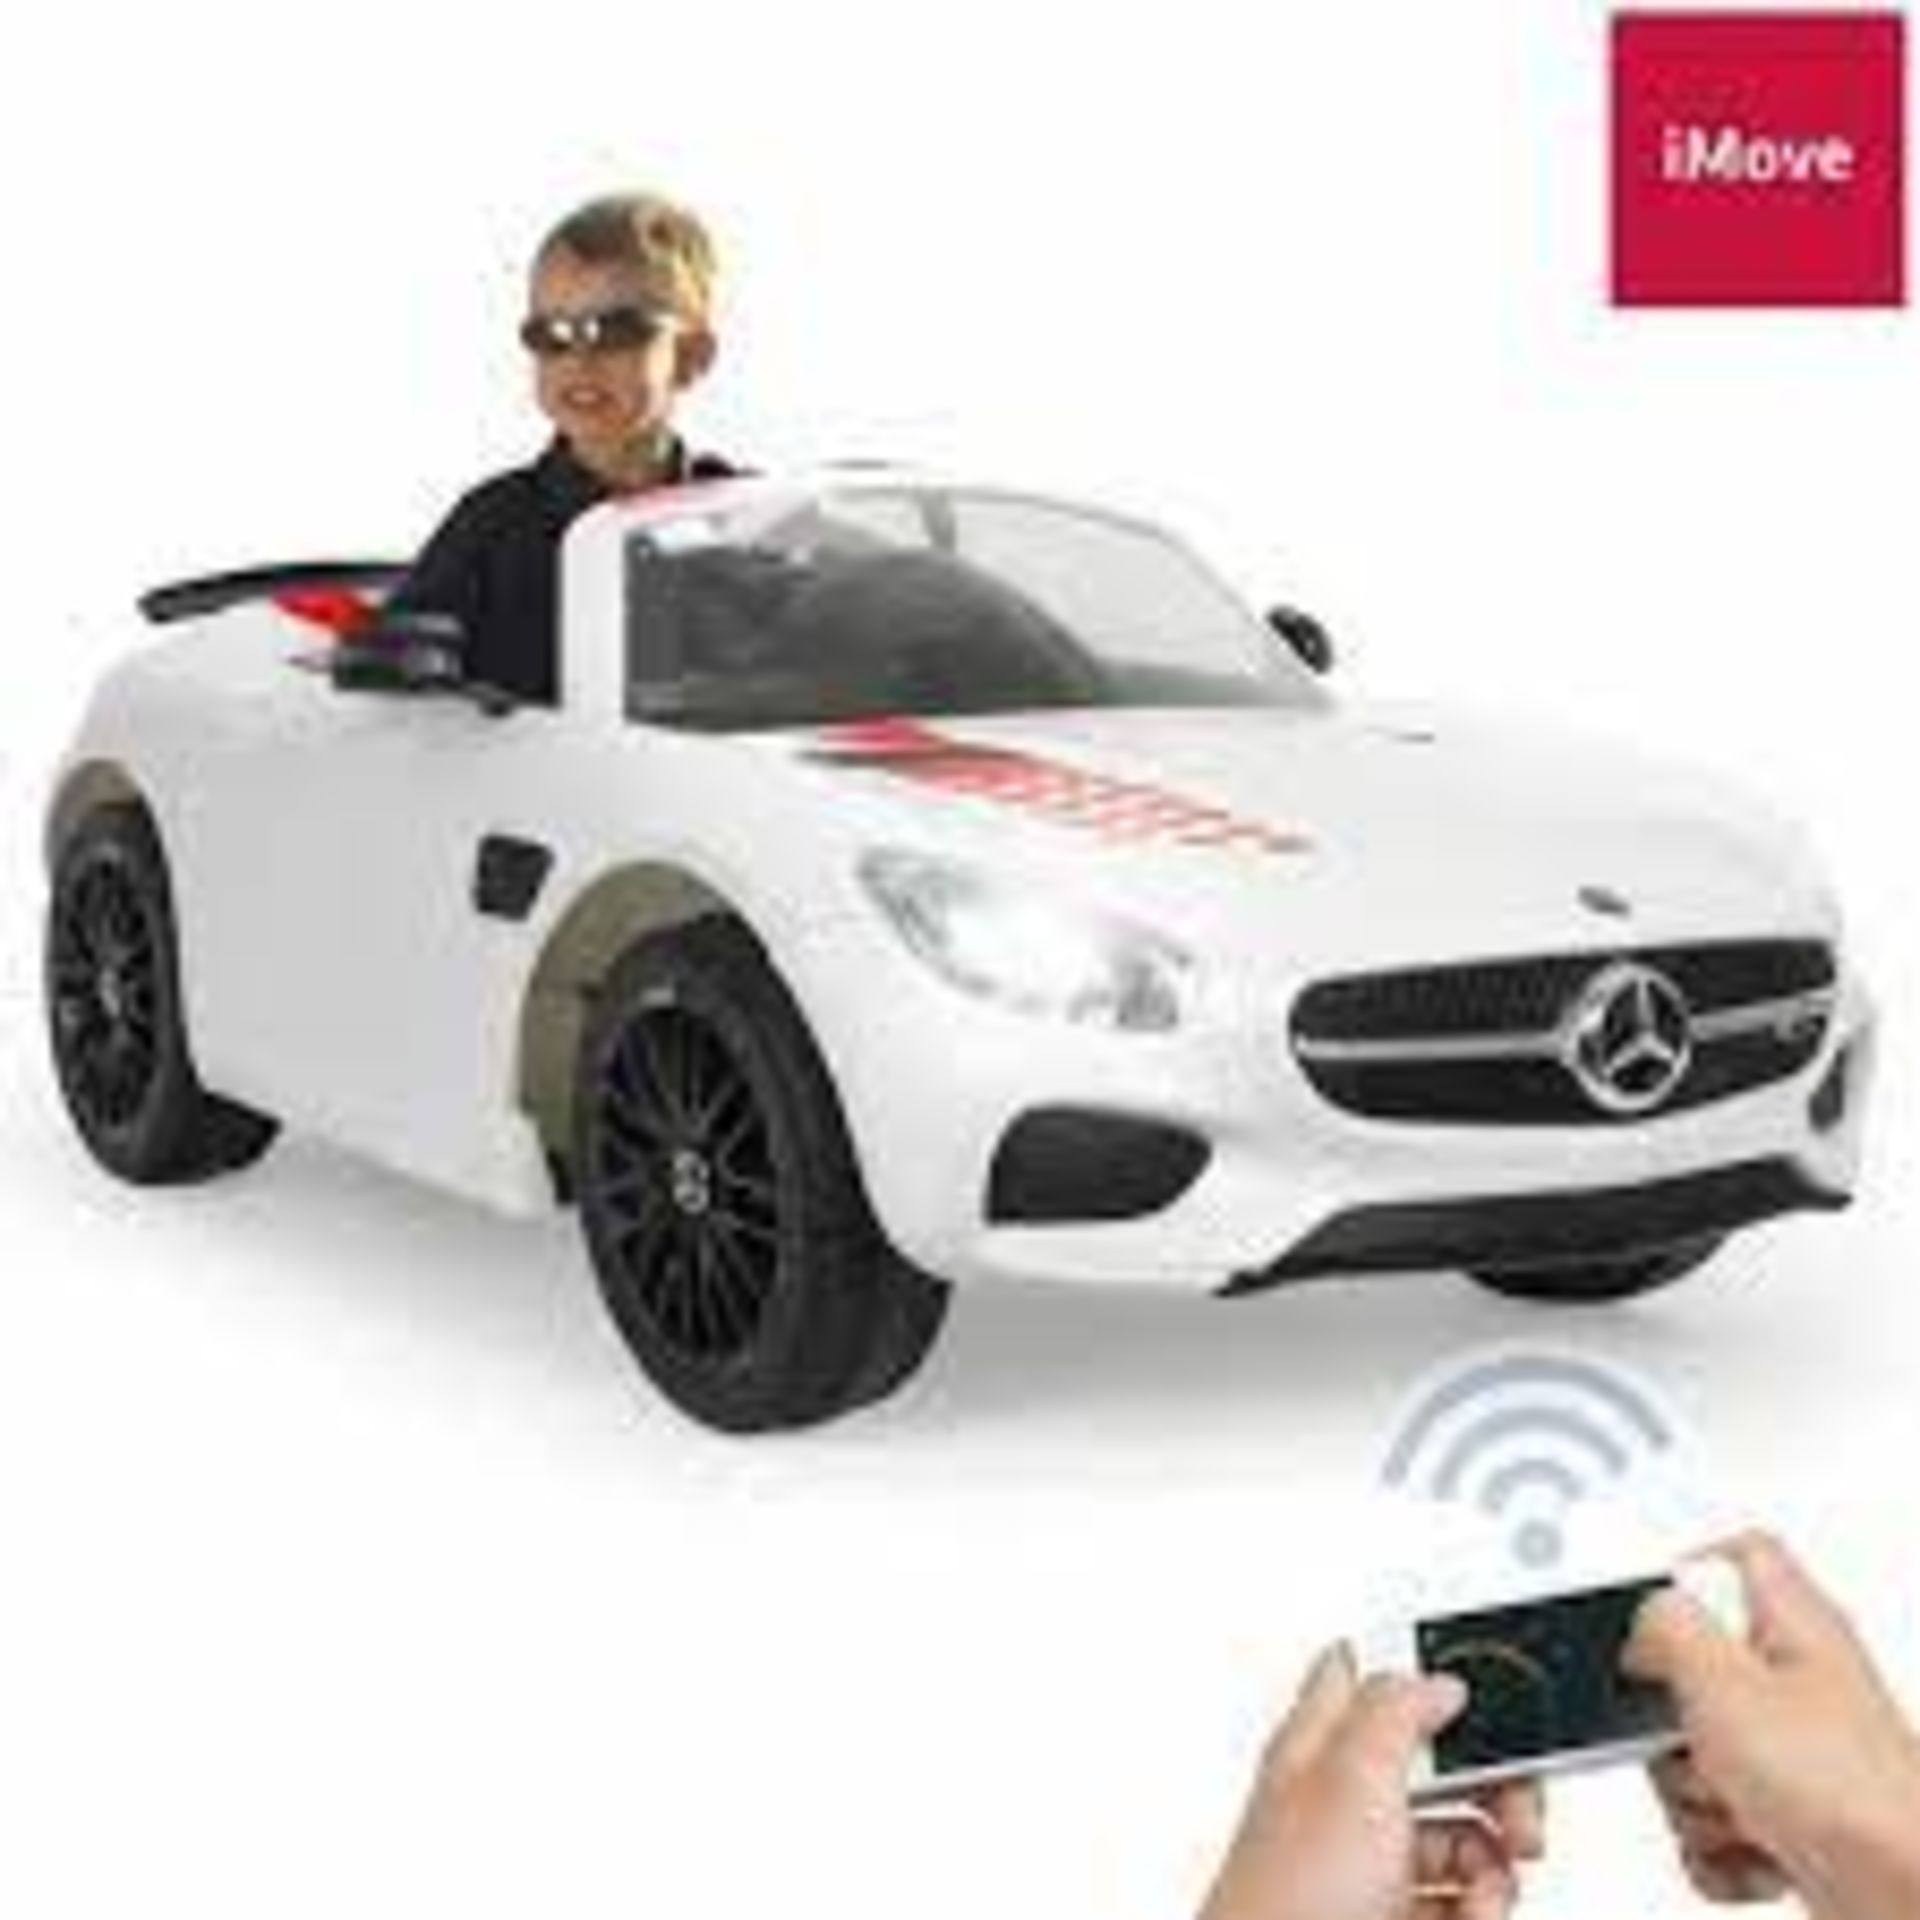 NEW BOXED INJUSA – Mercedes Benz GT-S 12 V Car with Remote Control and Gear Shift. White. (ROW9RACK)